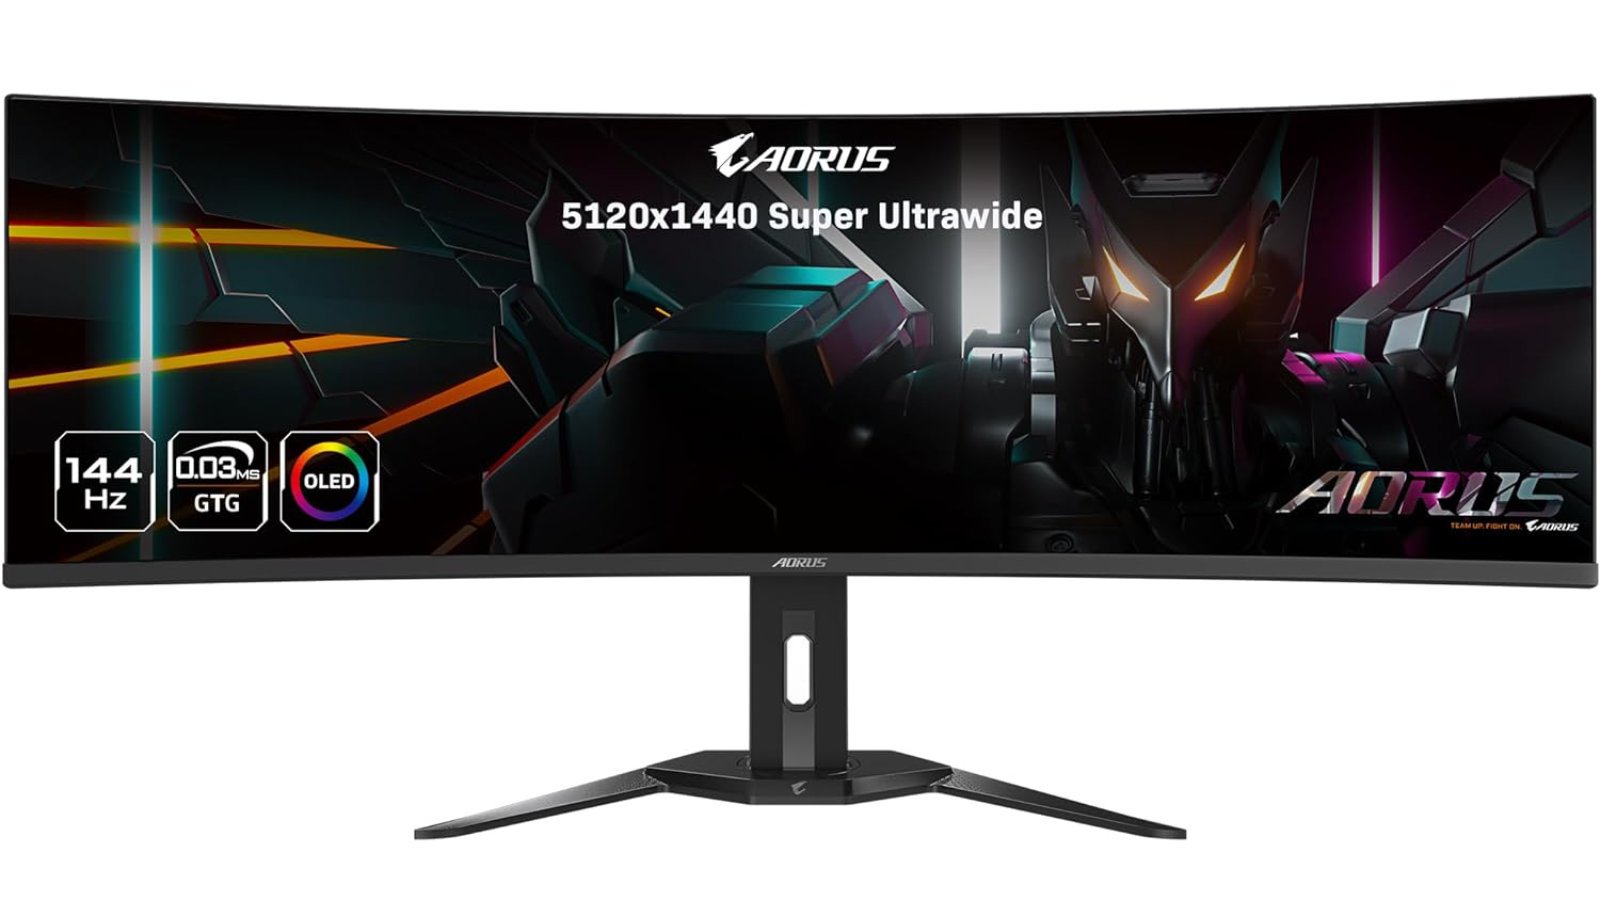 Gigabyte Aorus CO49DQ product photo shows the Super Ultrawide gaming monitor against a white background.